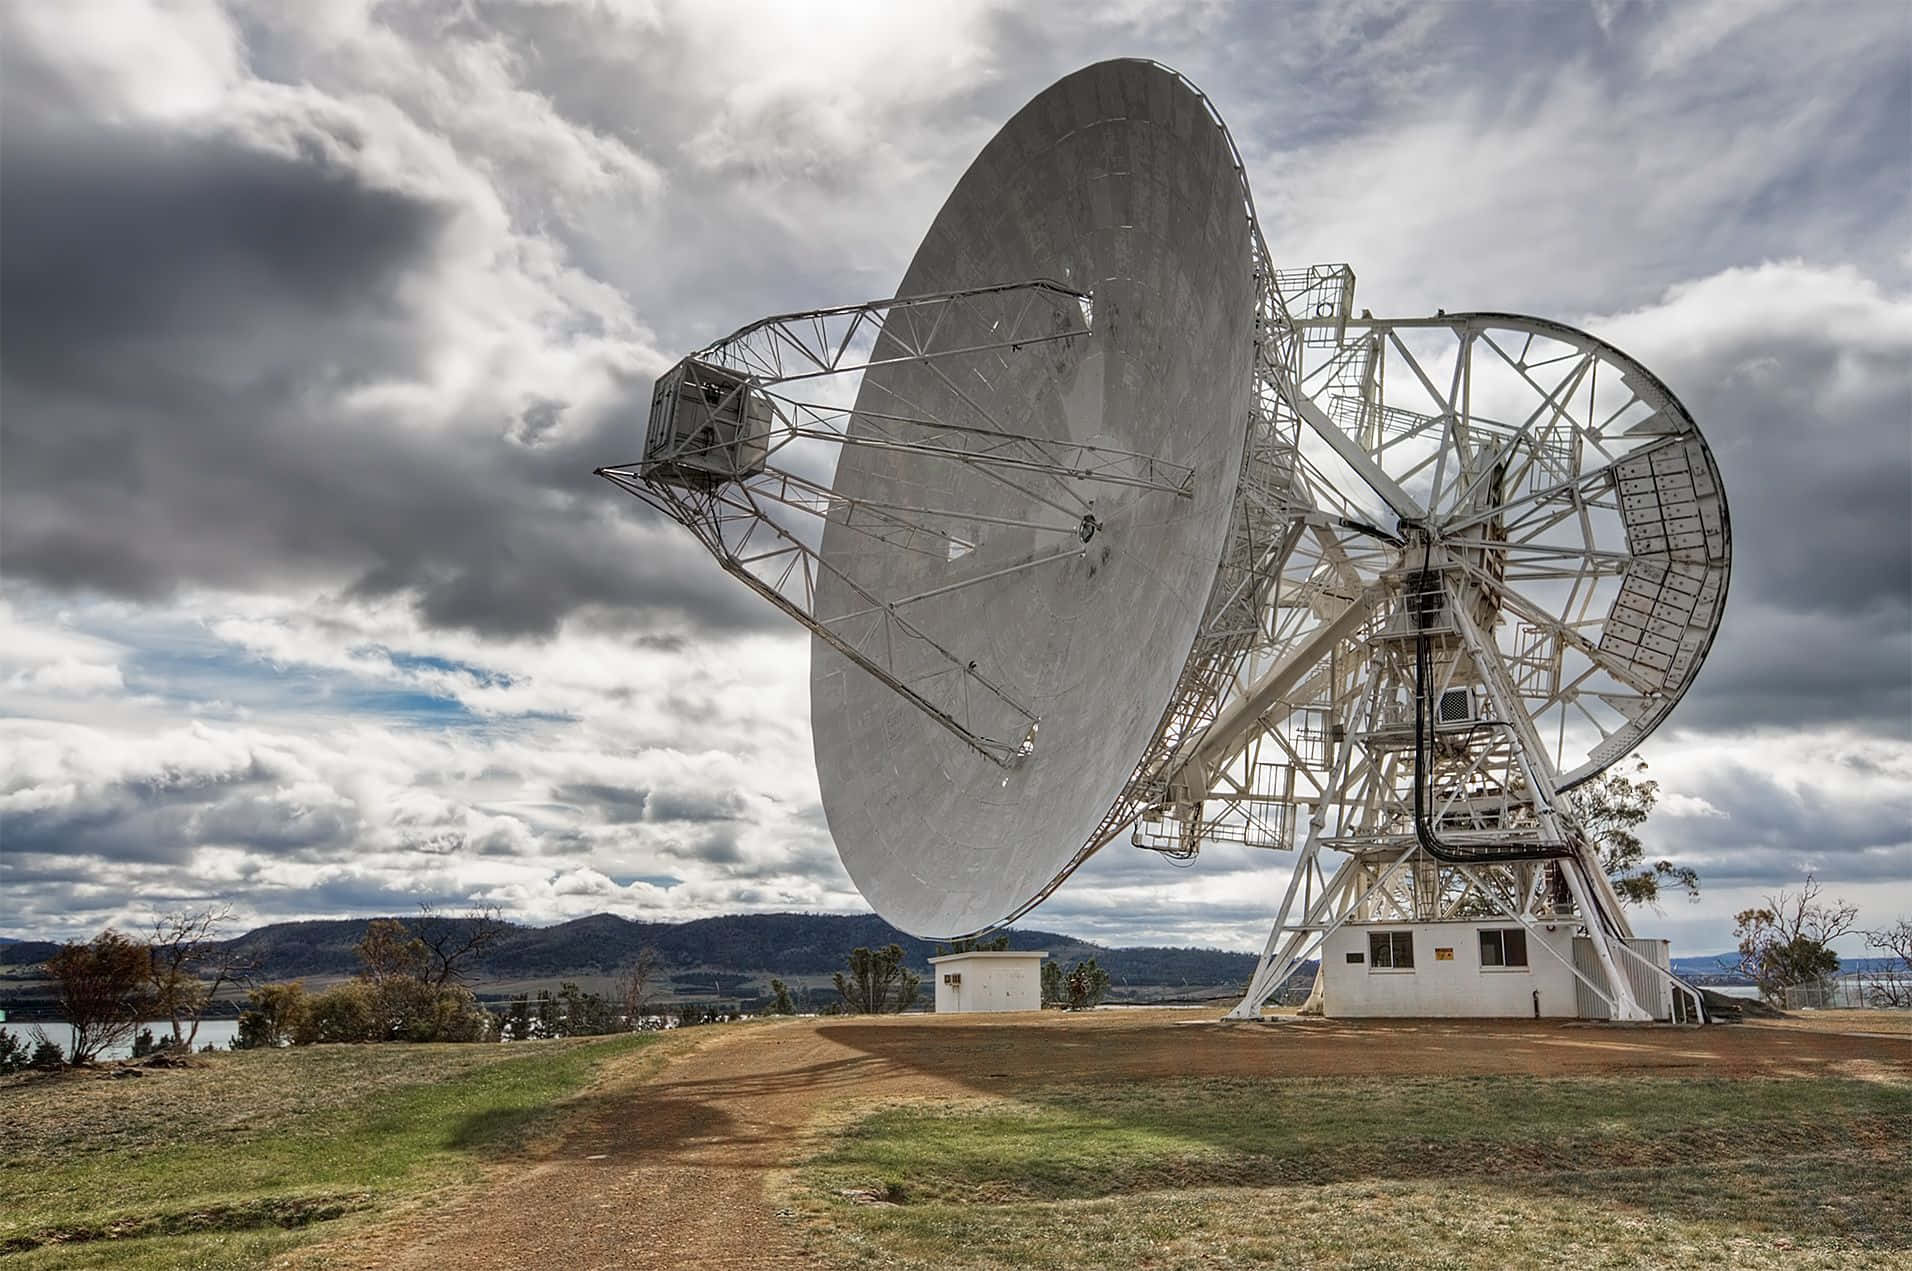 Captivating View of a Radio Telescope in Action Wallpaper